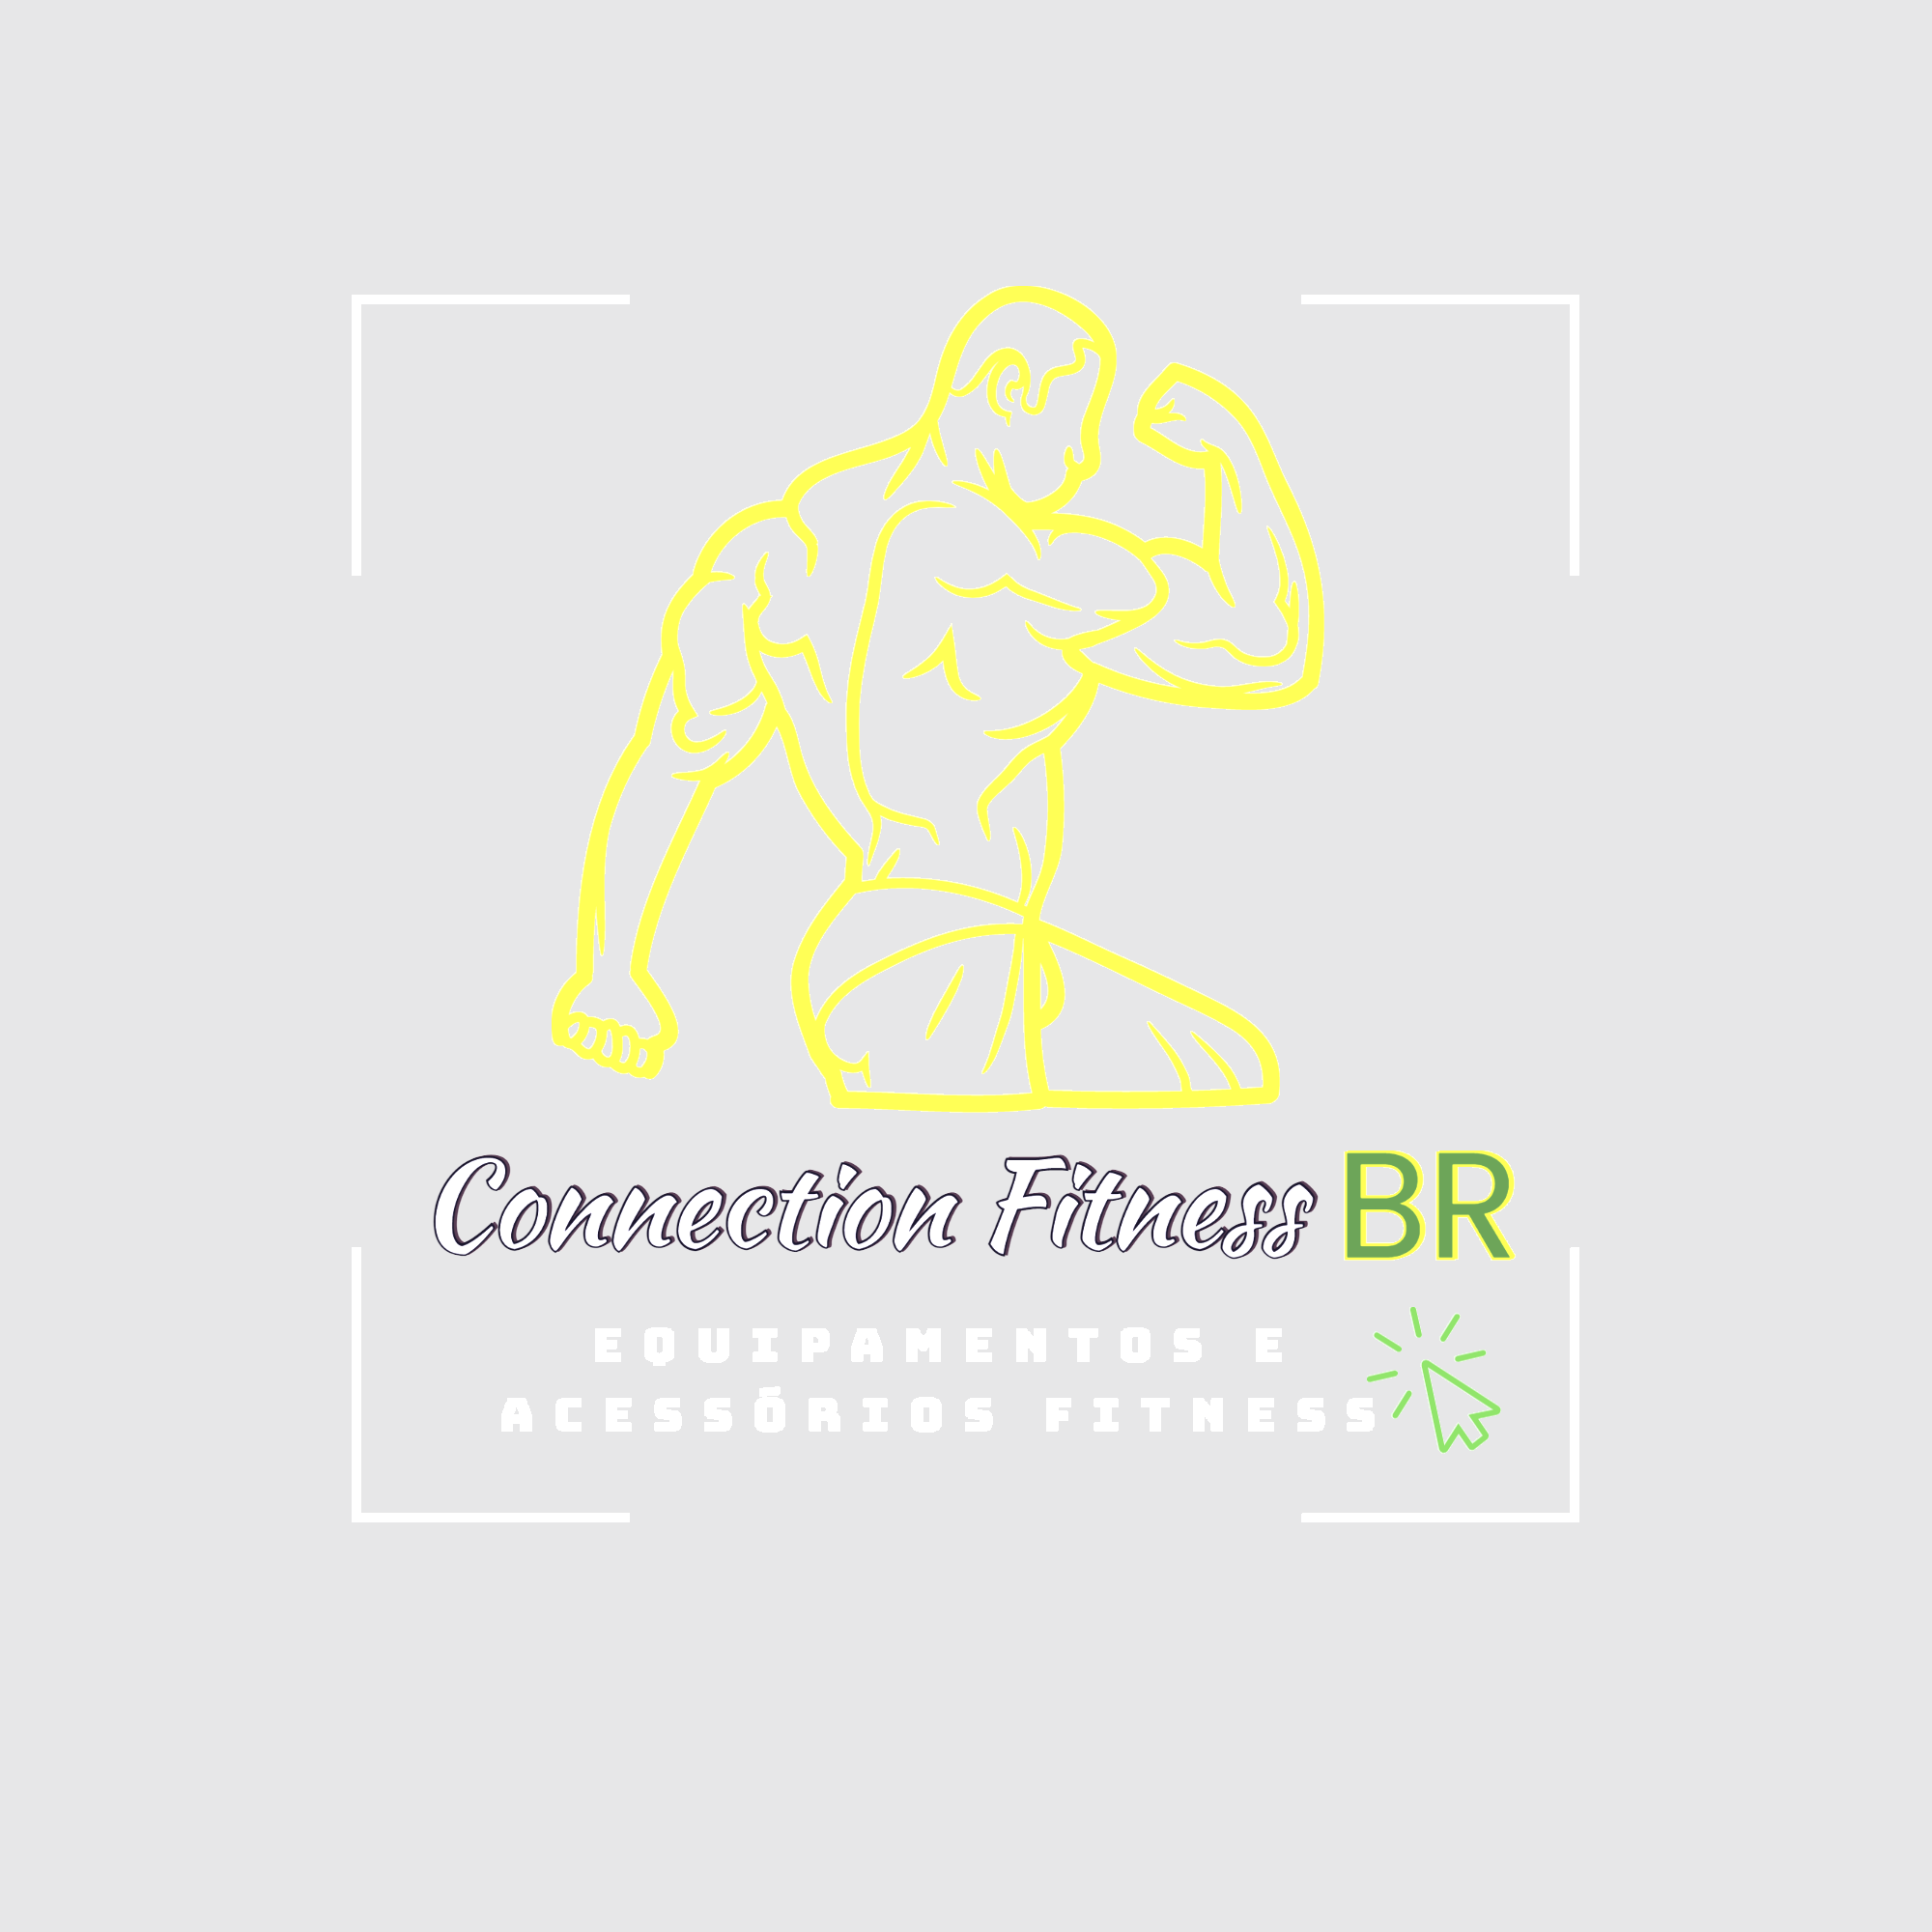 Connection Fitness BR